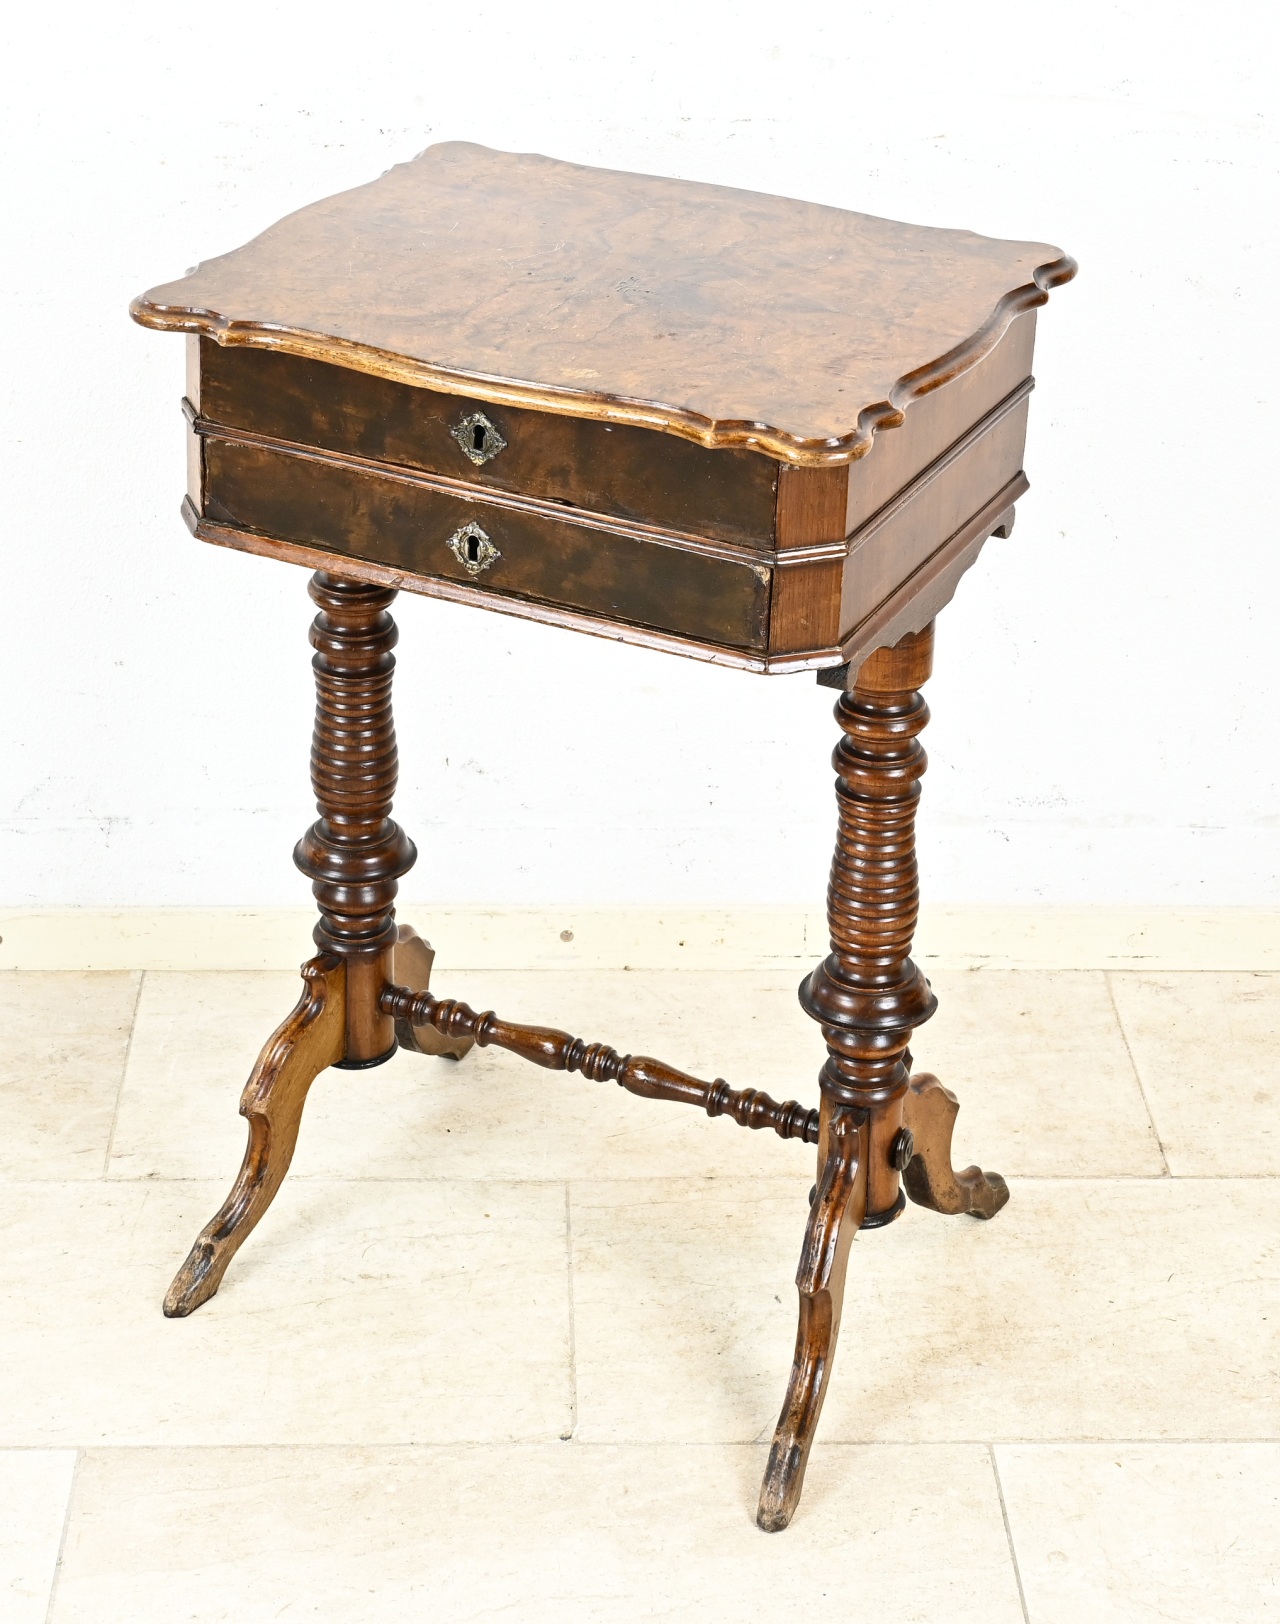 Sewing table, 1860